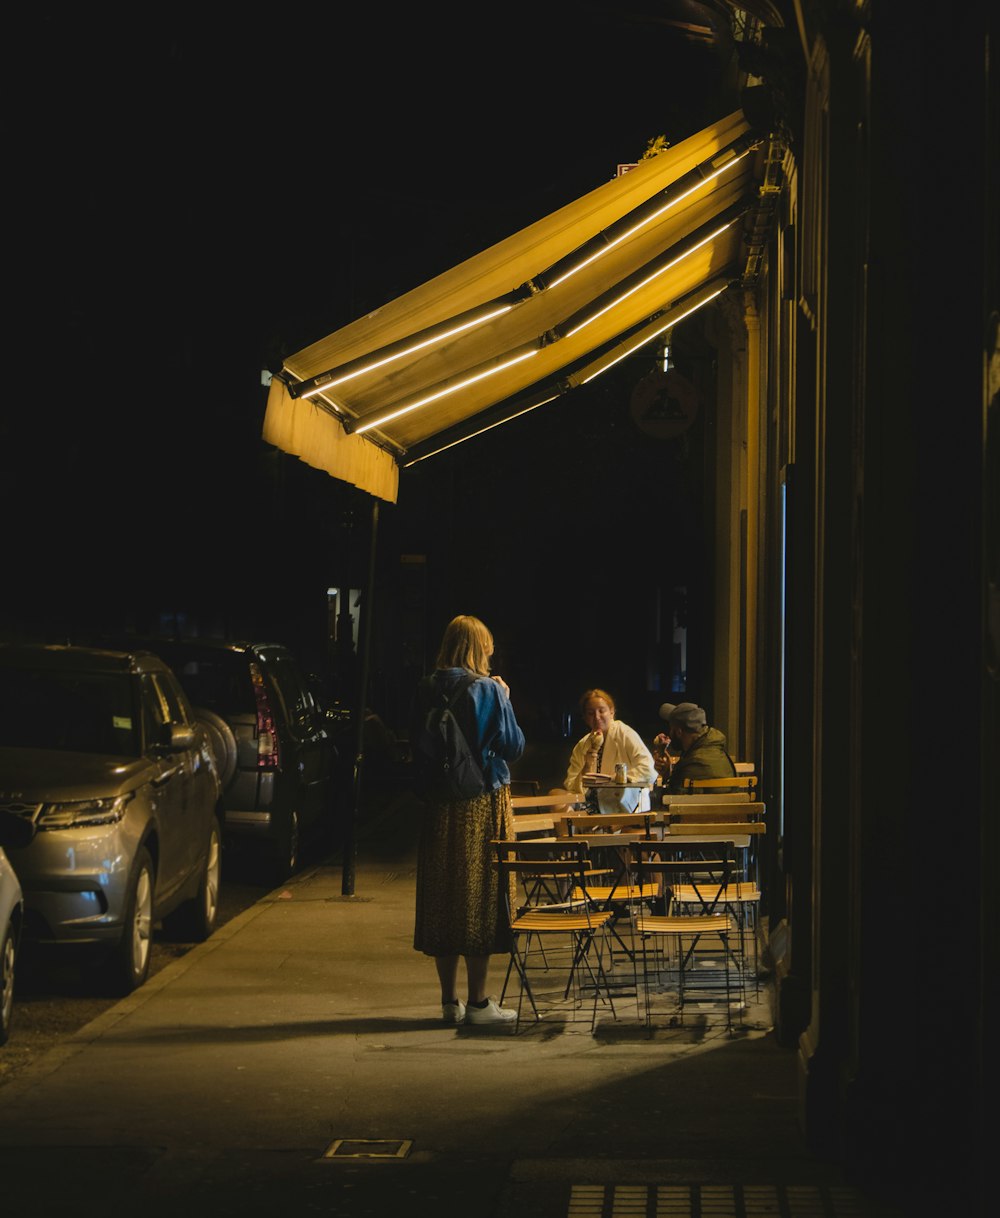 man in blue shirt sitting on brown wooden bench during night time